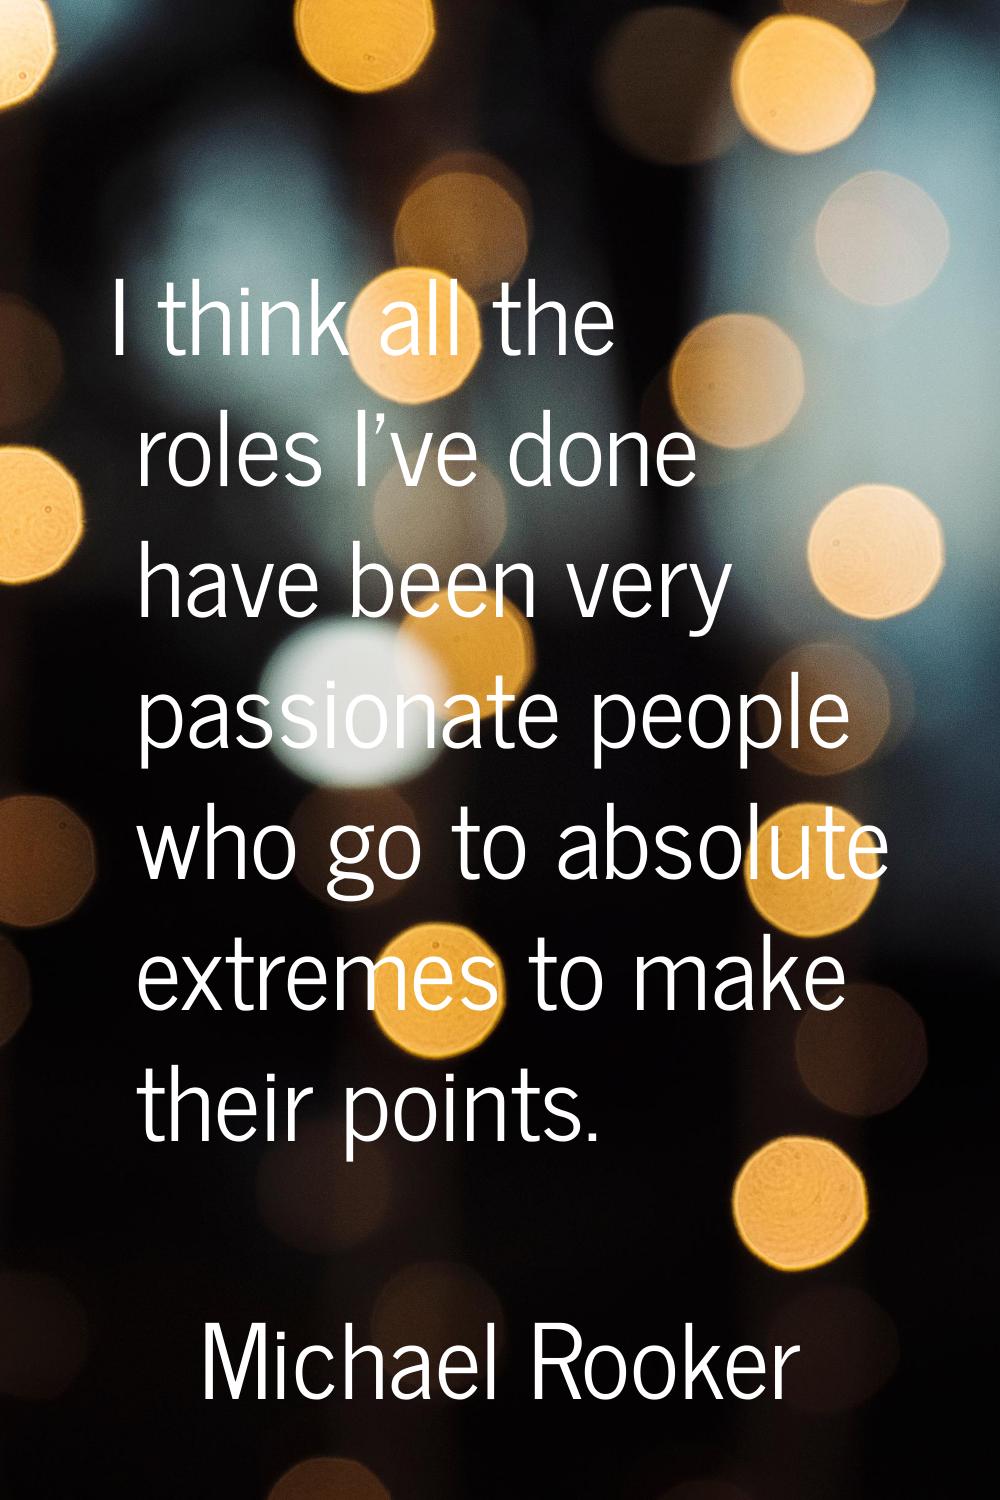 I think all the roles I've done have been very passionate people who go to absolute extremes to mak